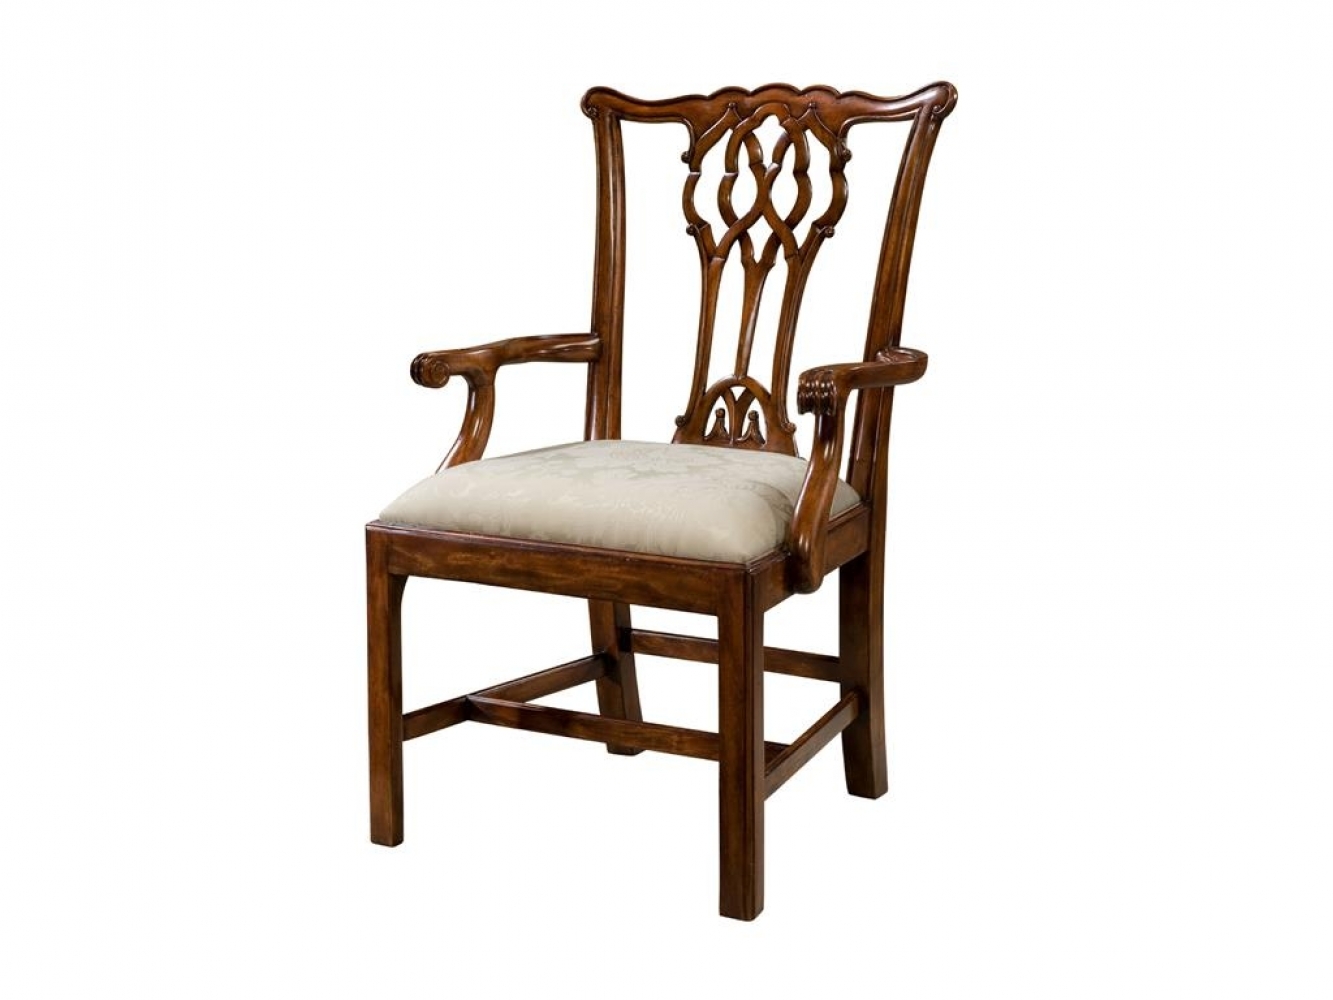 The Great Room Dining Arm Chair